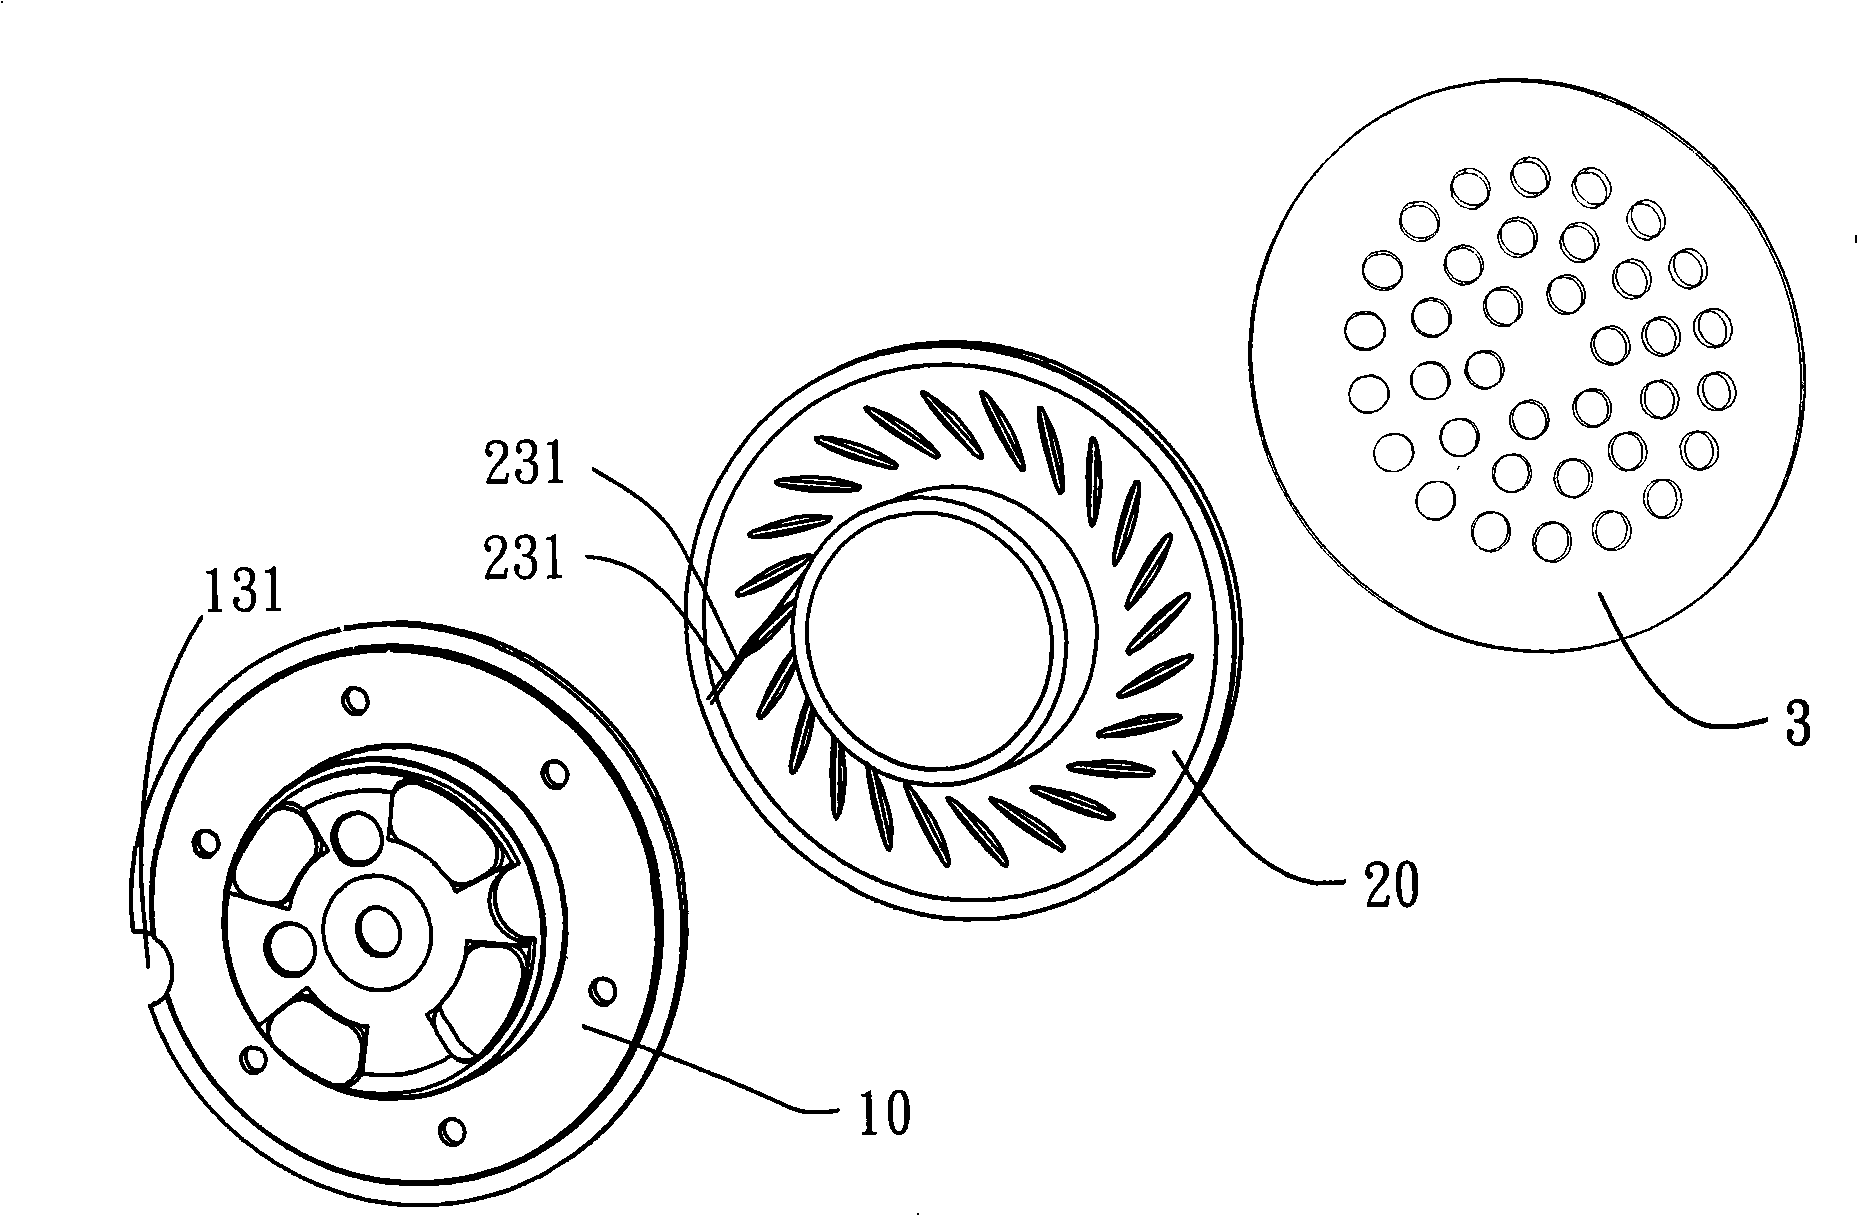 Loudspeaker and its manufacturing method